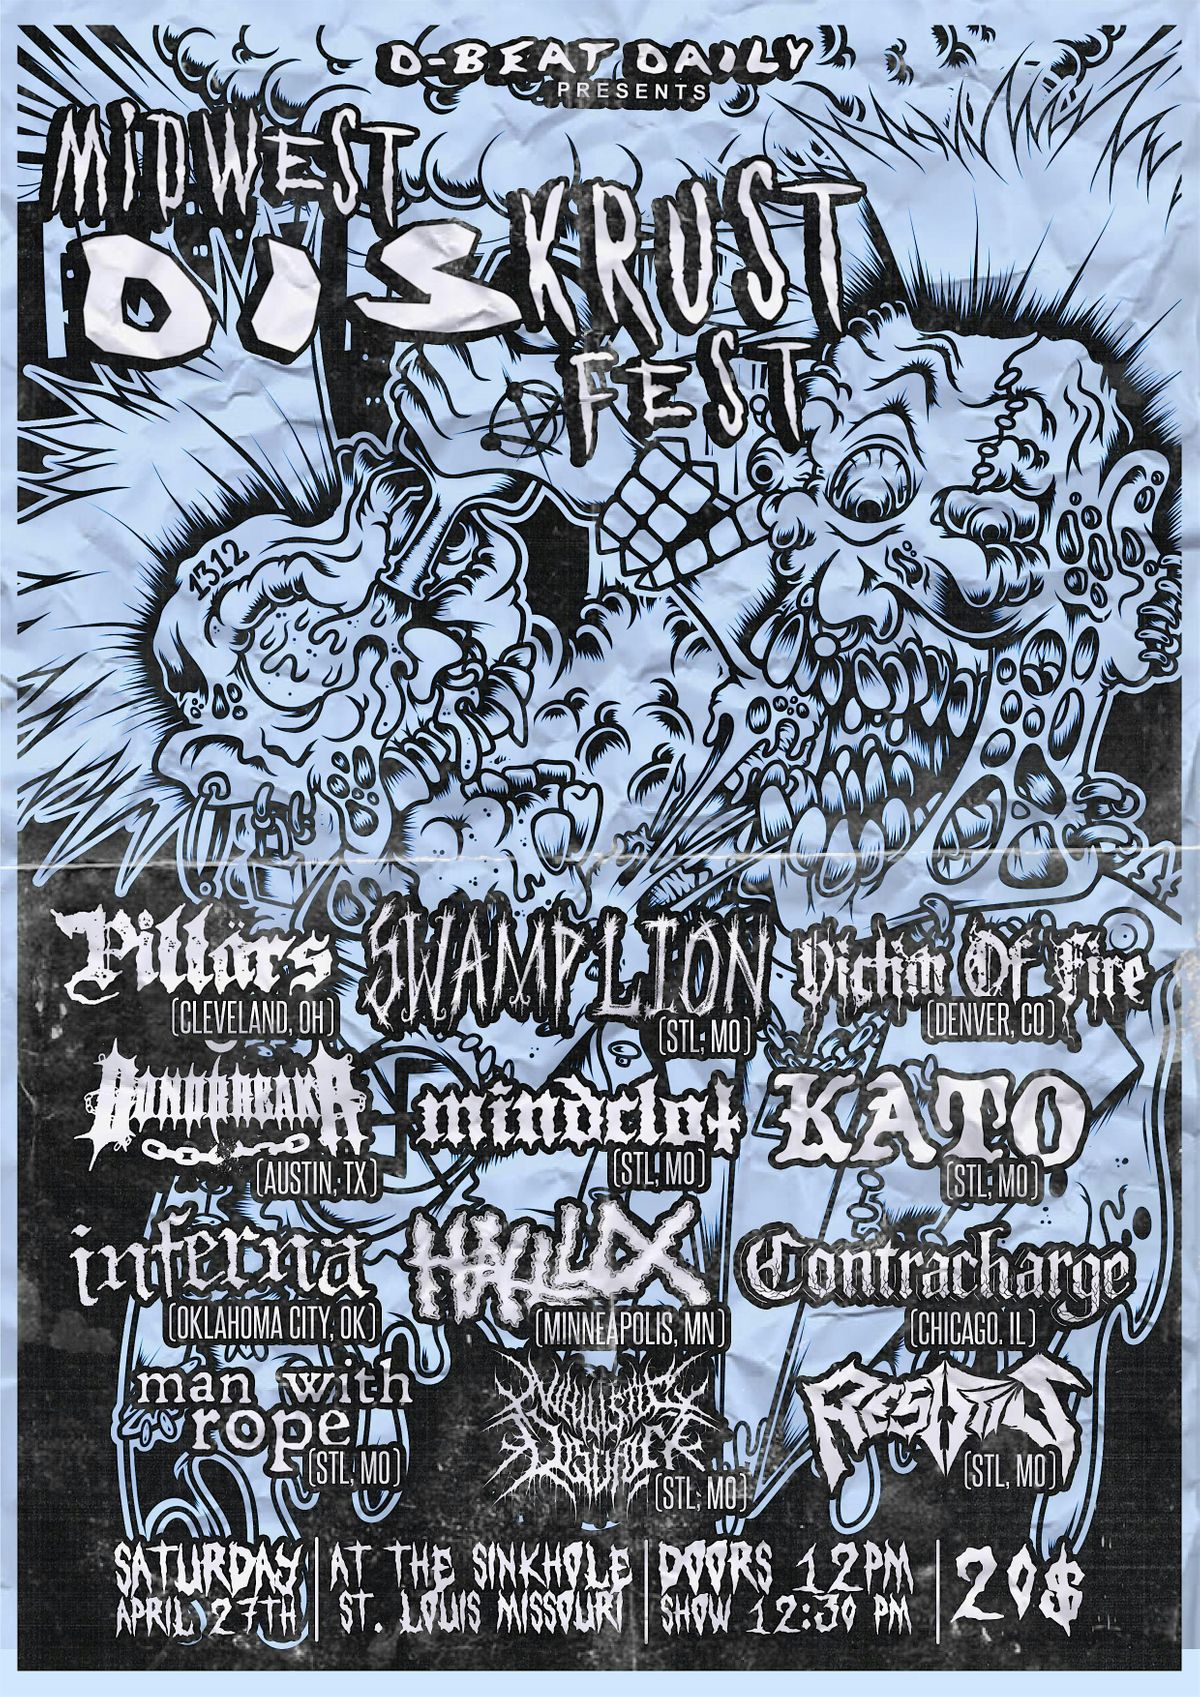 Midwest Diskrust Fest